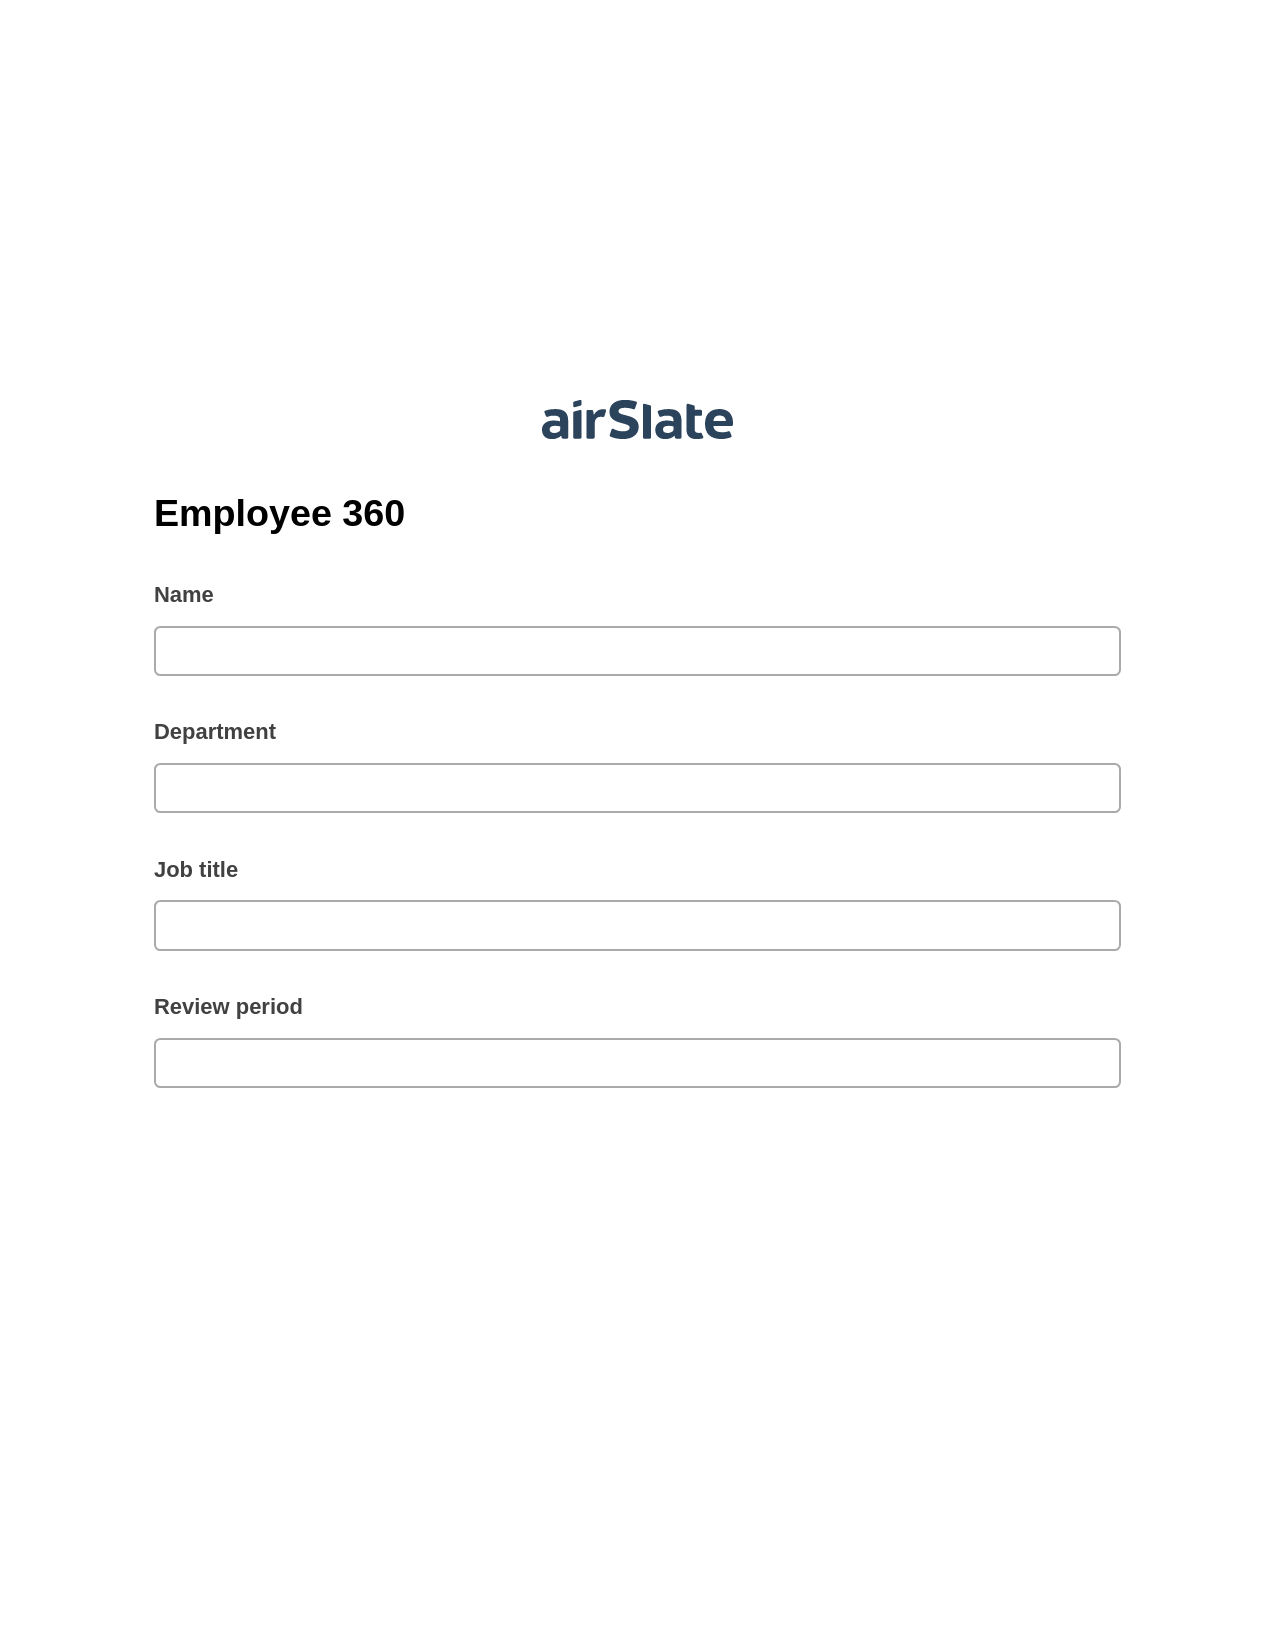 Employee 360 Pre-fill from MS Dynamics 365 Records, Remove Slate Bot, Export to Salesforce Record Bot